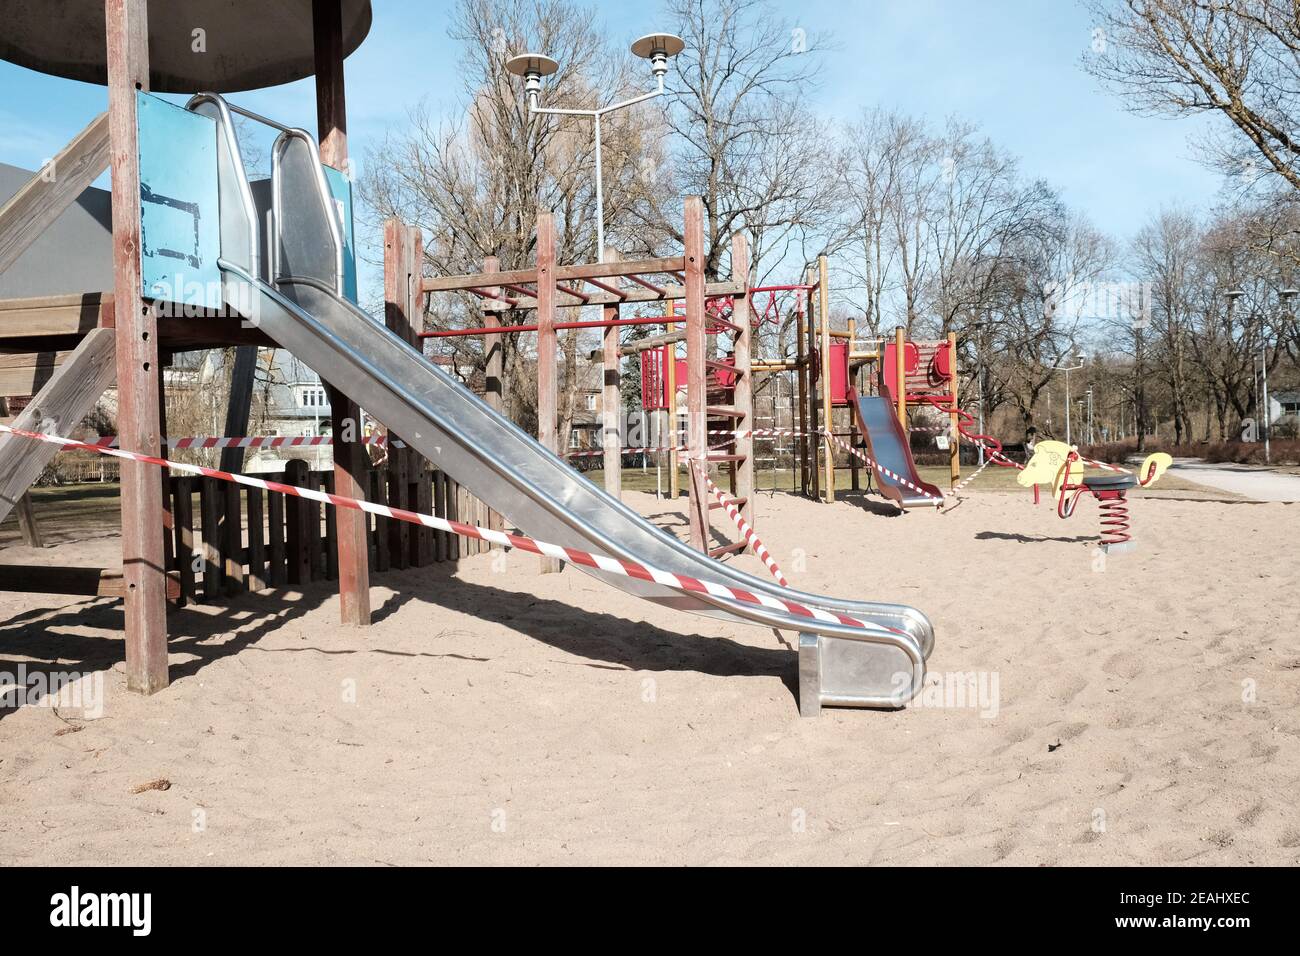 Restricted playground in a city park during COVID-19 lockdown. Stock Photo